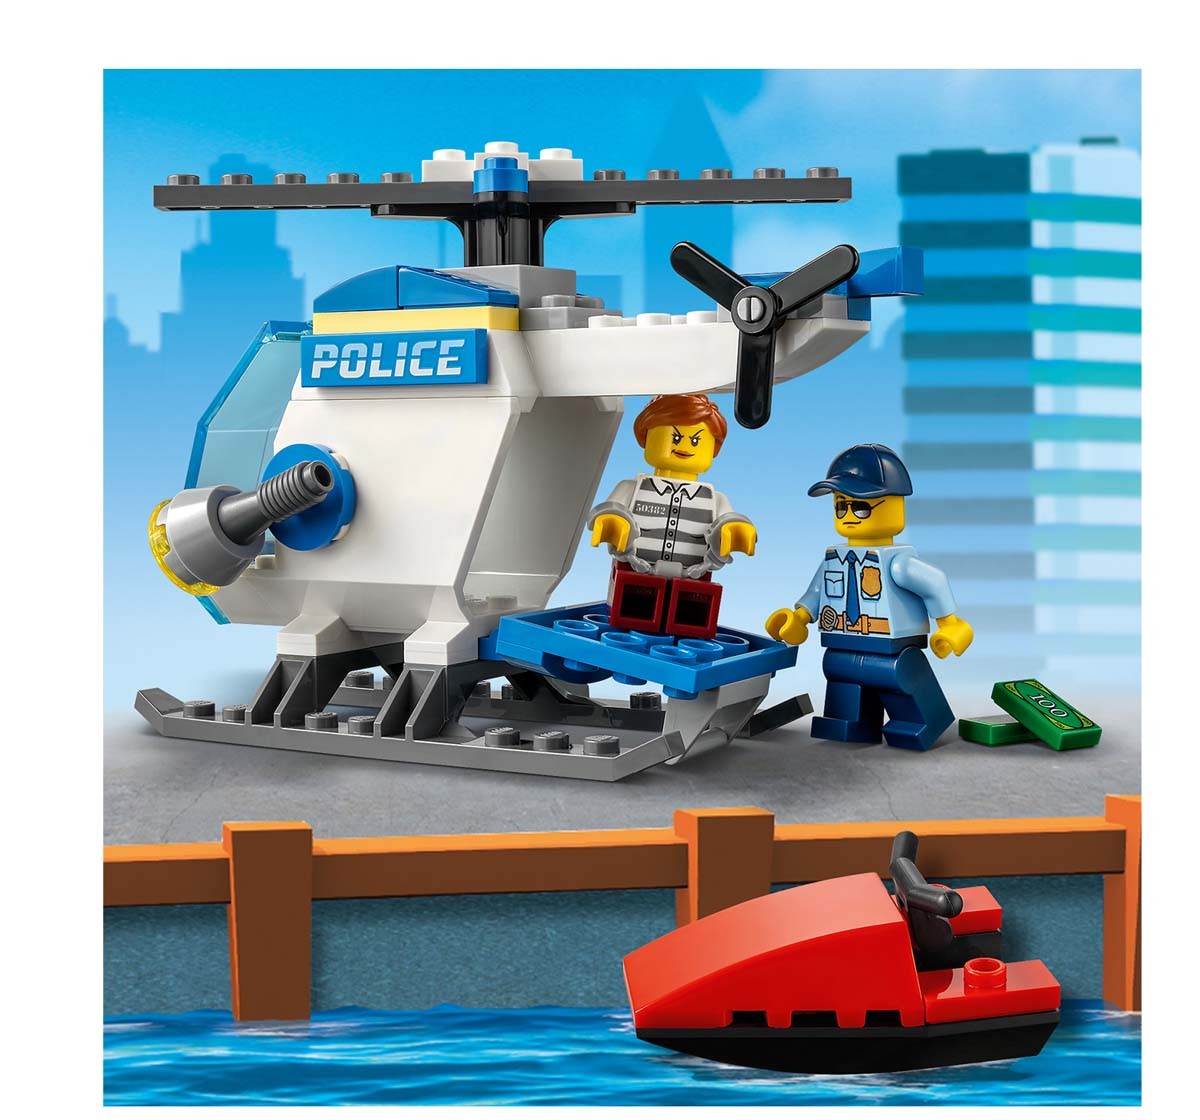 Lego Police Helicopter Lego Blocks for Kids Age 4Y+